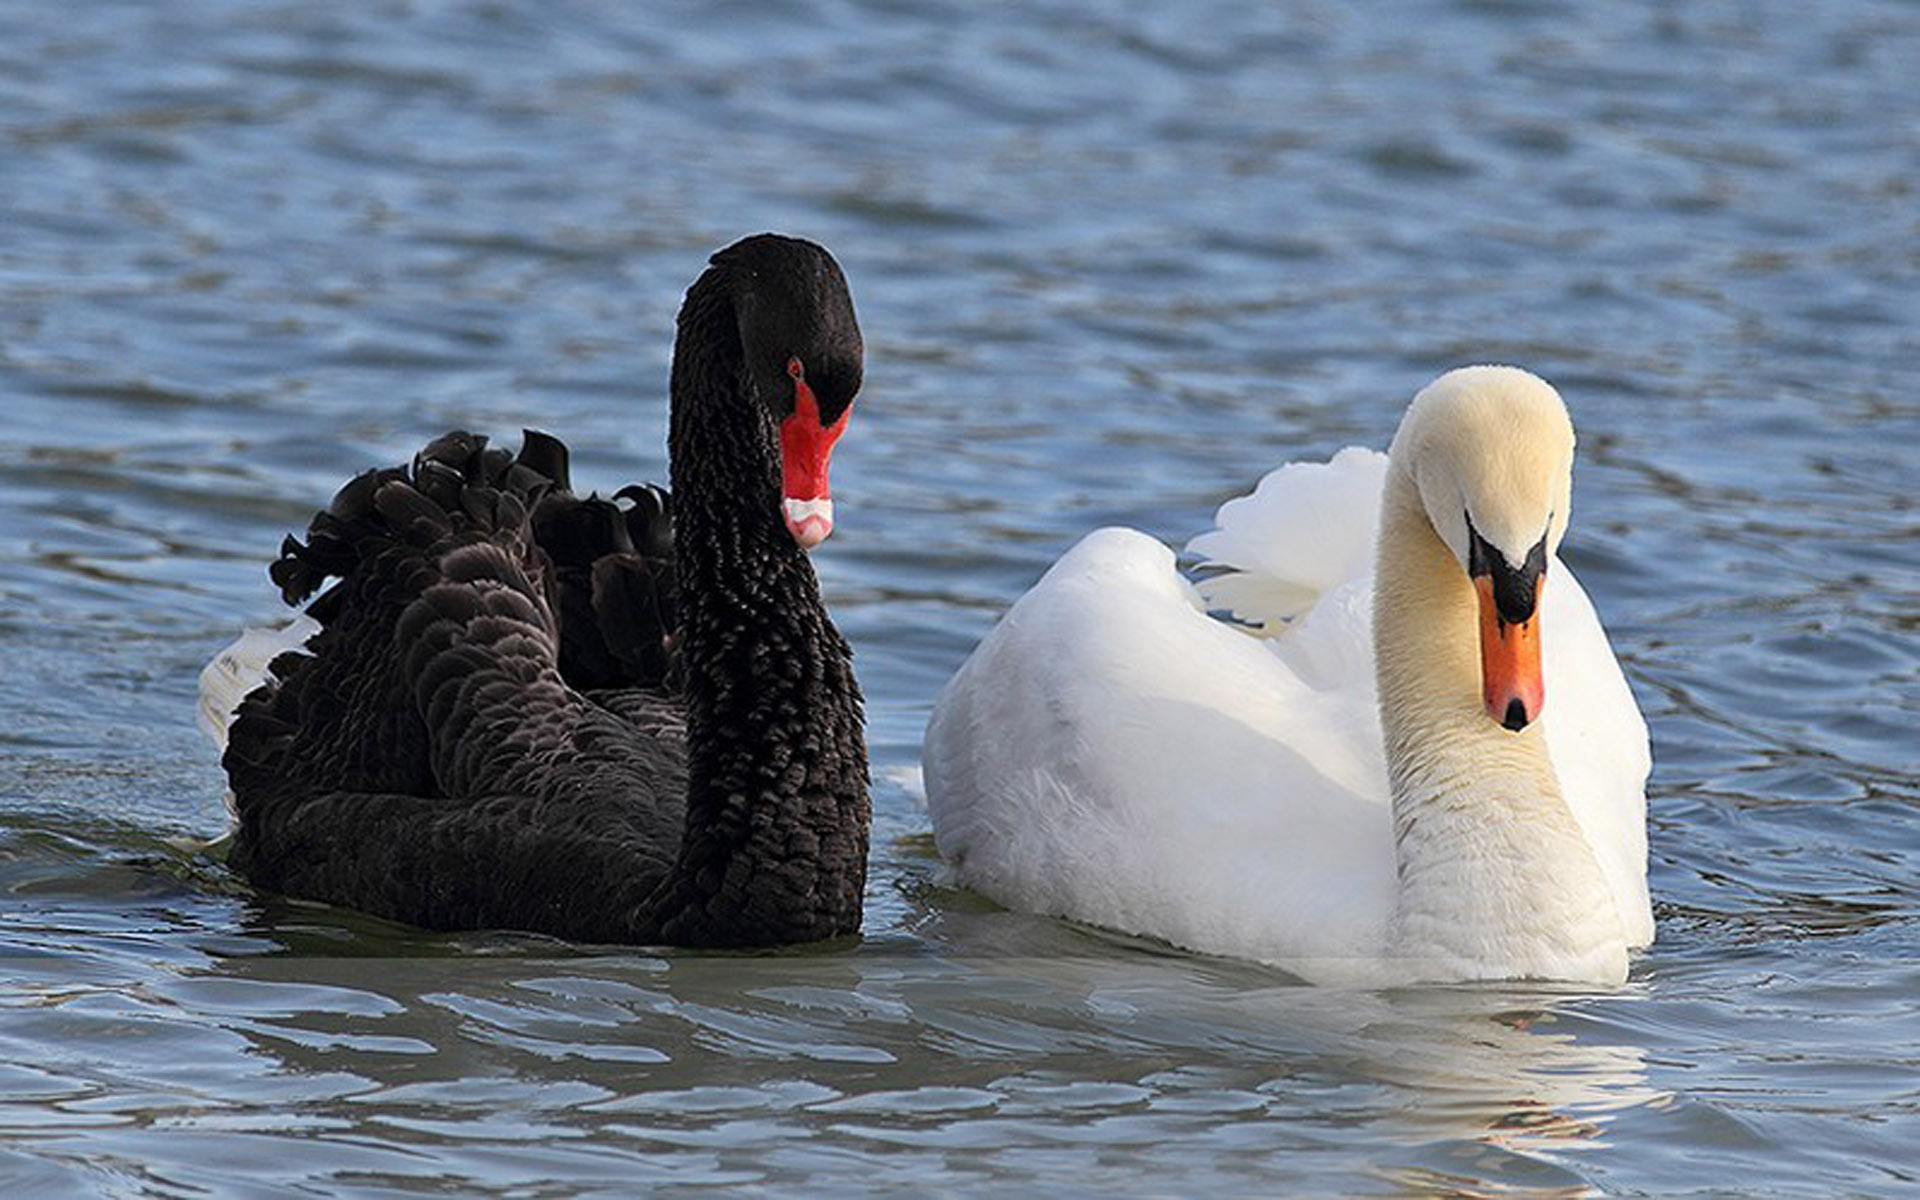 Black And White Swan, Swimming In The Hd For Mobile Phones And Laptops :